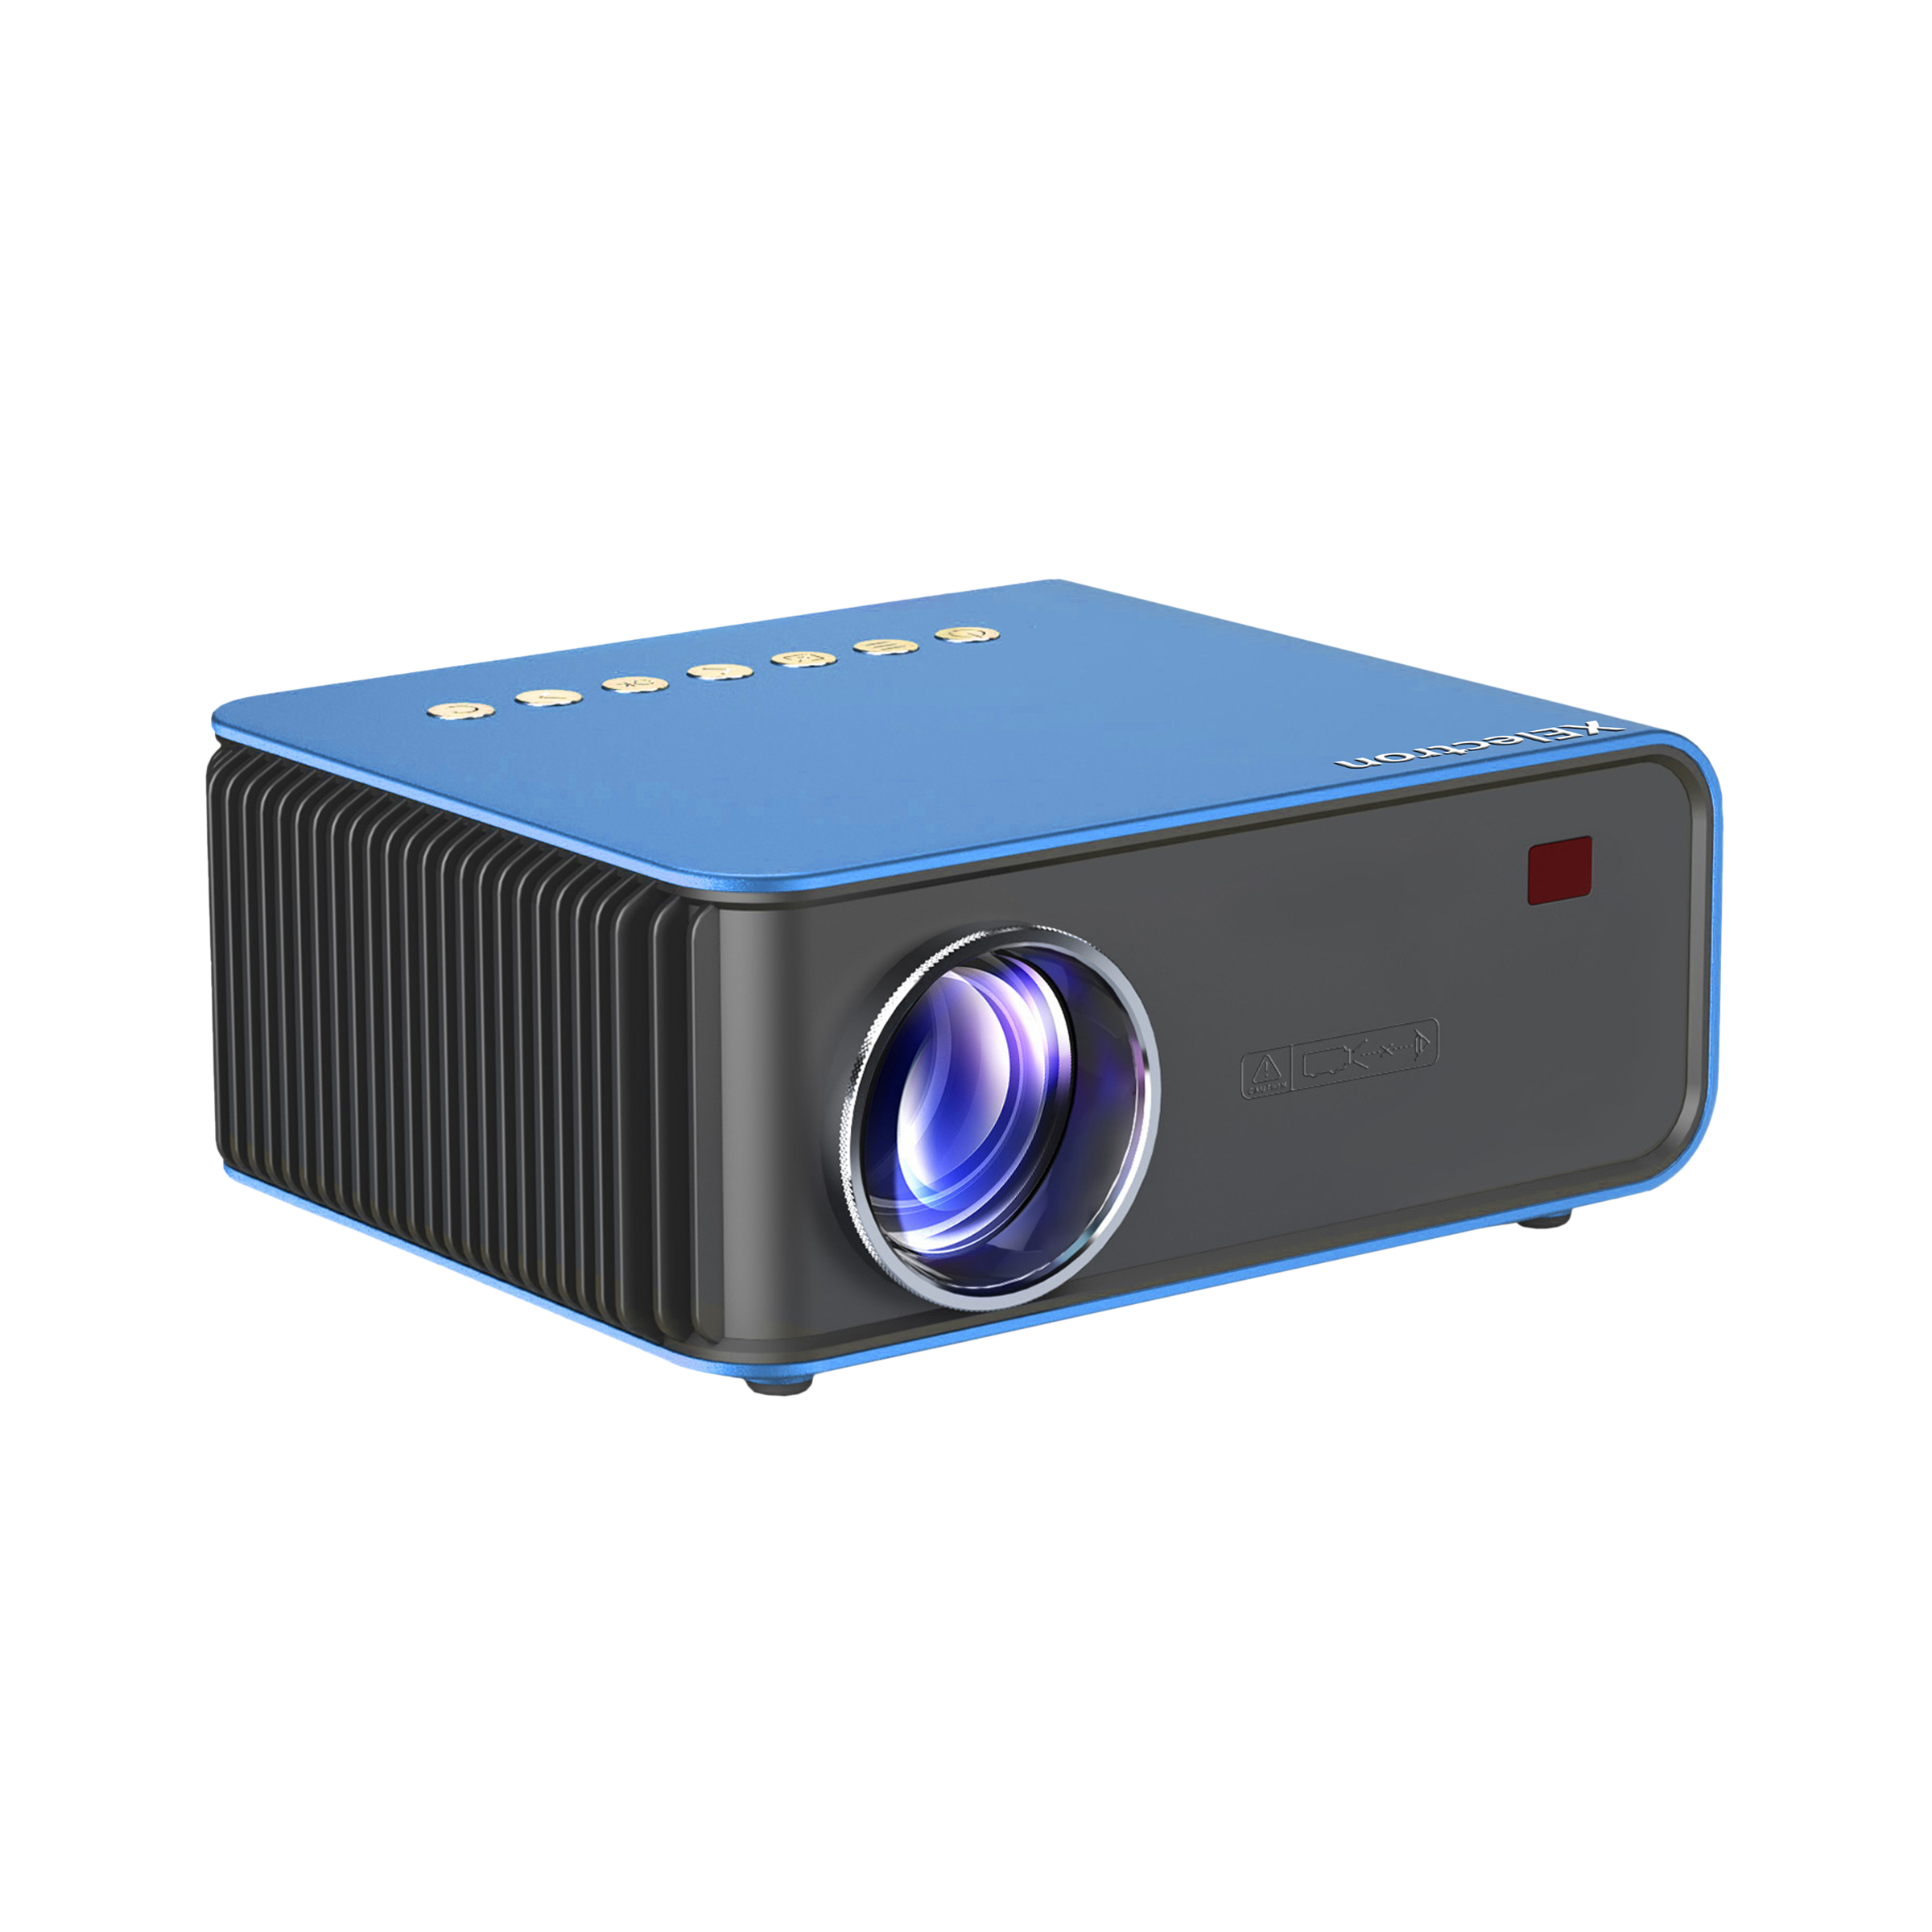 XElectron S2 Miracast Full HD LED Projector (2600 Lumens, USB + HDMI + AV Ports, 1080p Support, Blue)